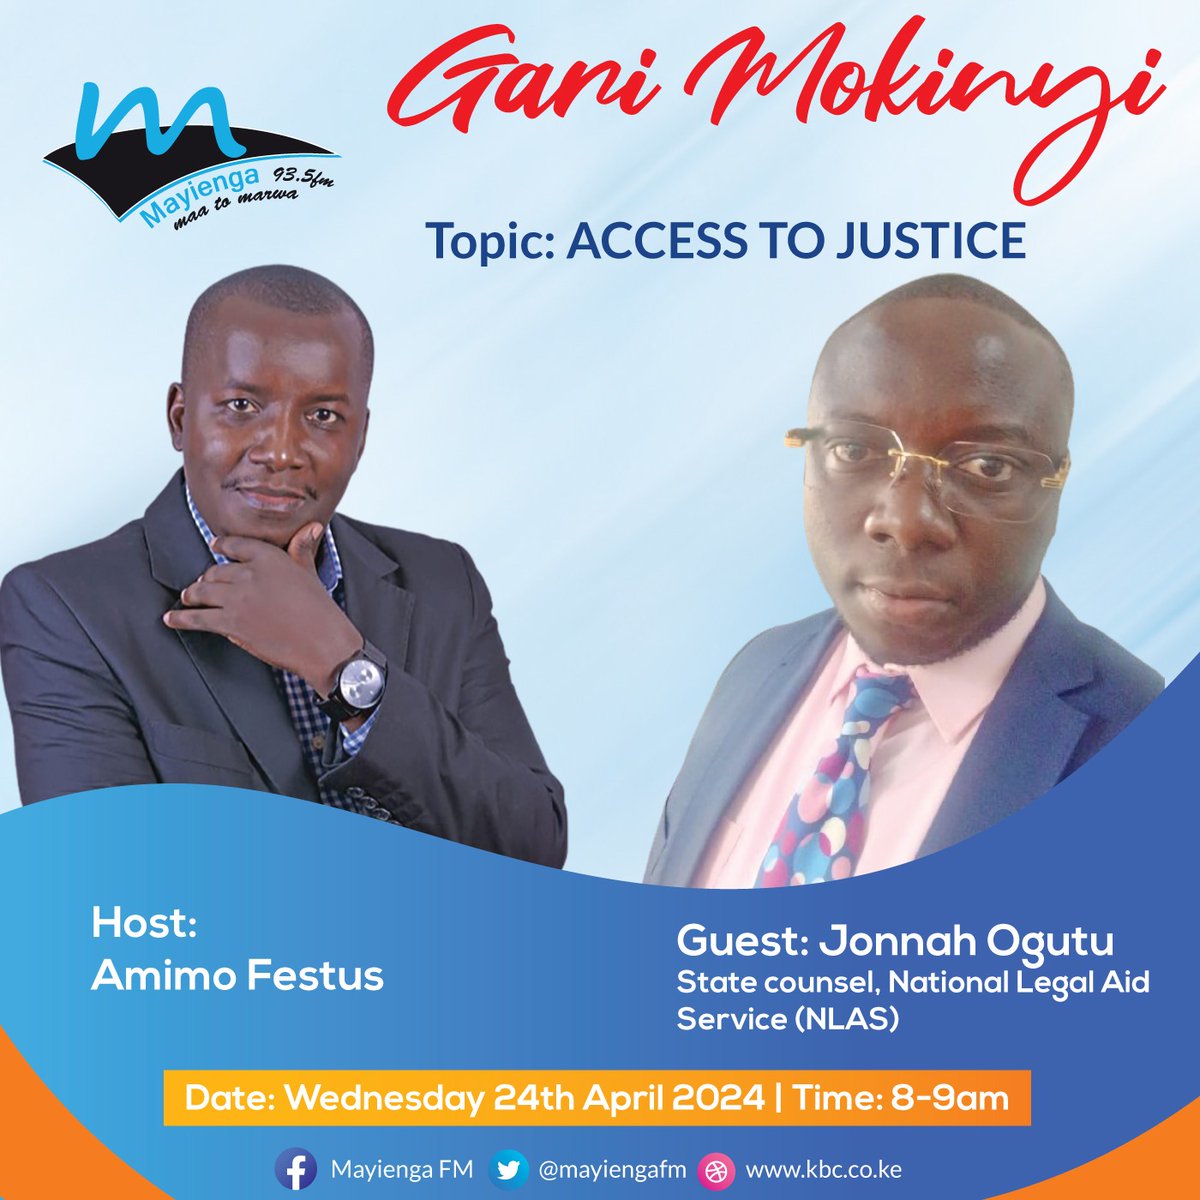 Going down to the Lakeside. Leaving no one behind. Tune in to Mayienga FM tomorrow morning as our state counsel Jonah Ogutu talks on access to justice and how #NLAS is advancing access to justice for the marginalized and vulnerable communities
#LegalAidWeek #NLAS #AccessToJustice